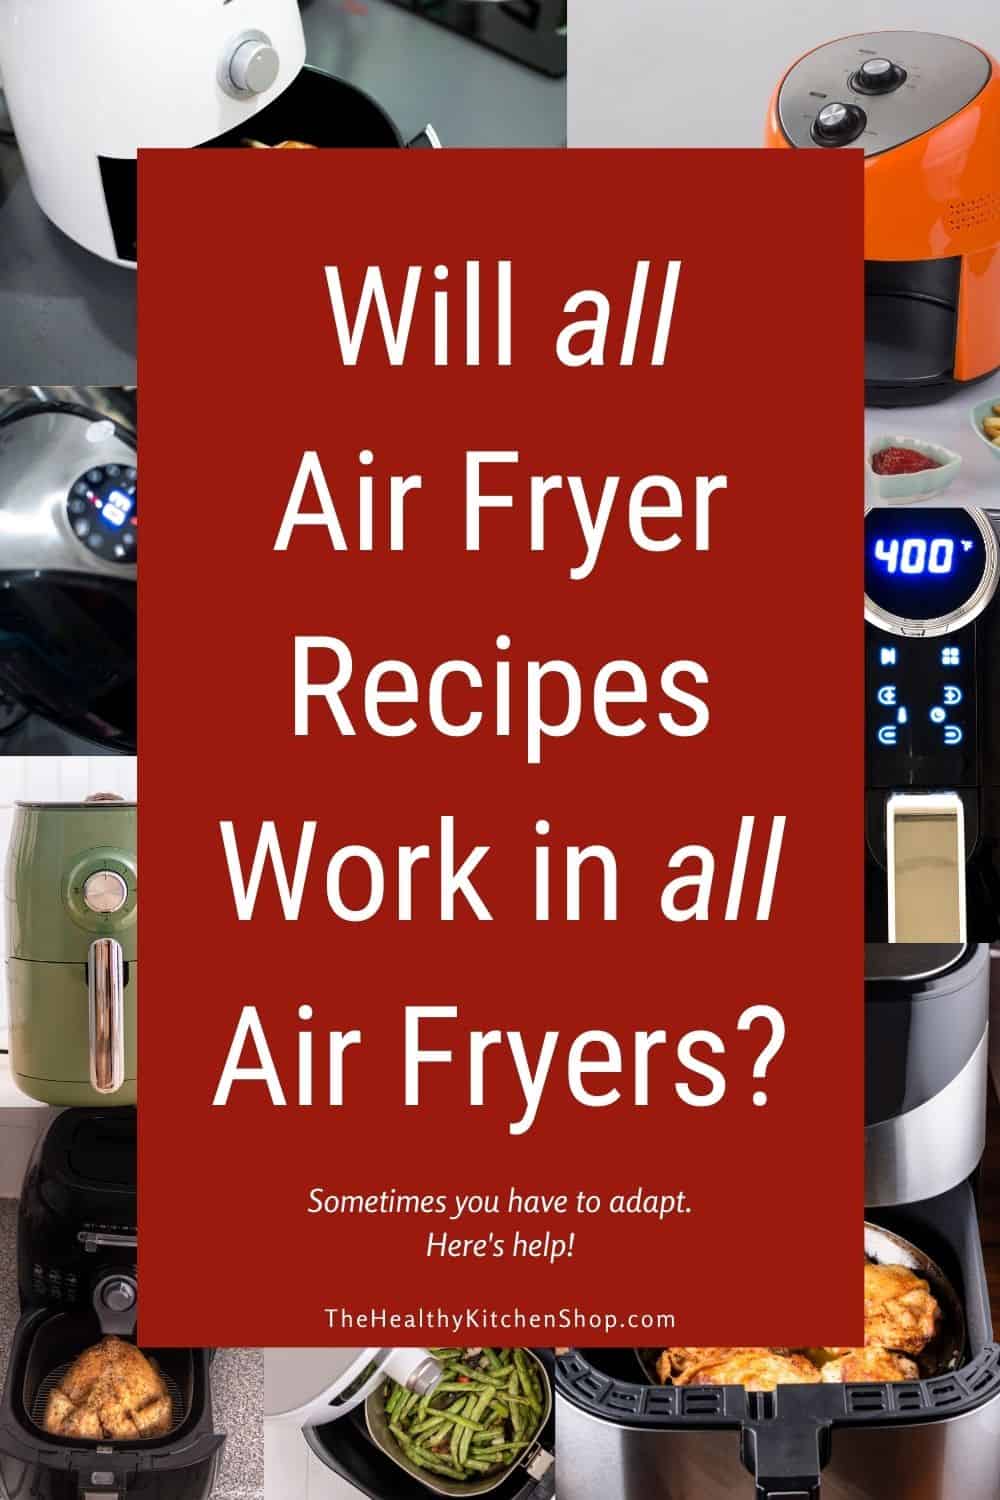 Will all air fryer recipes work in all air fryers? Here's help!